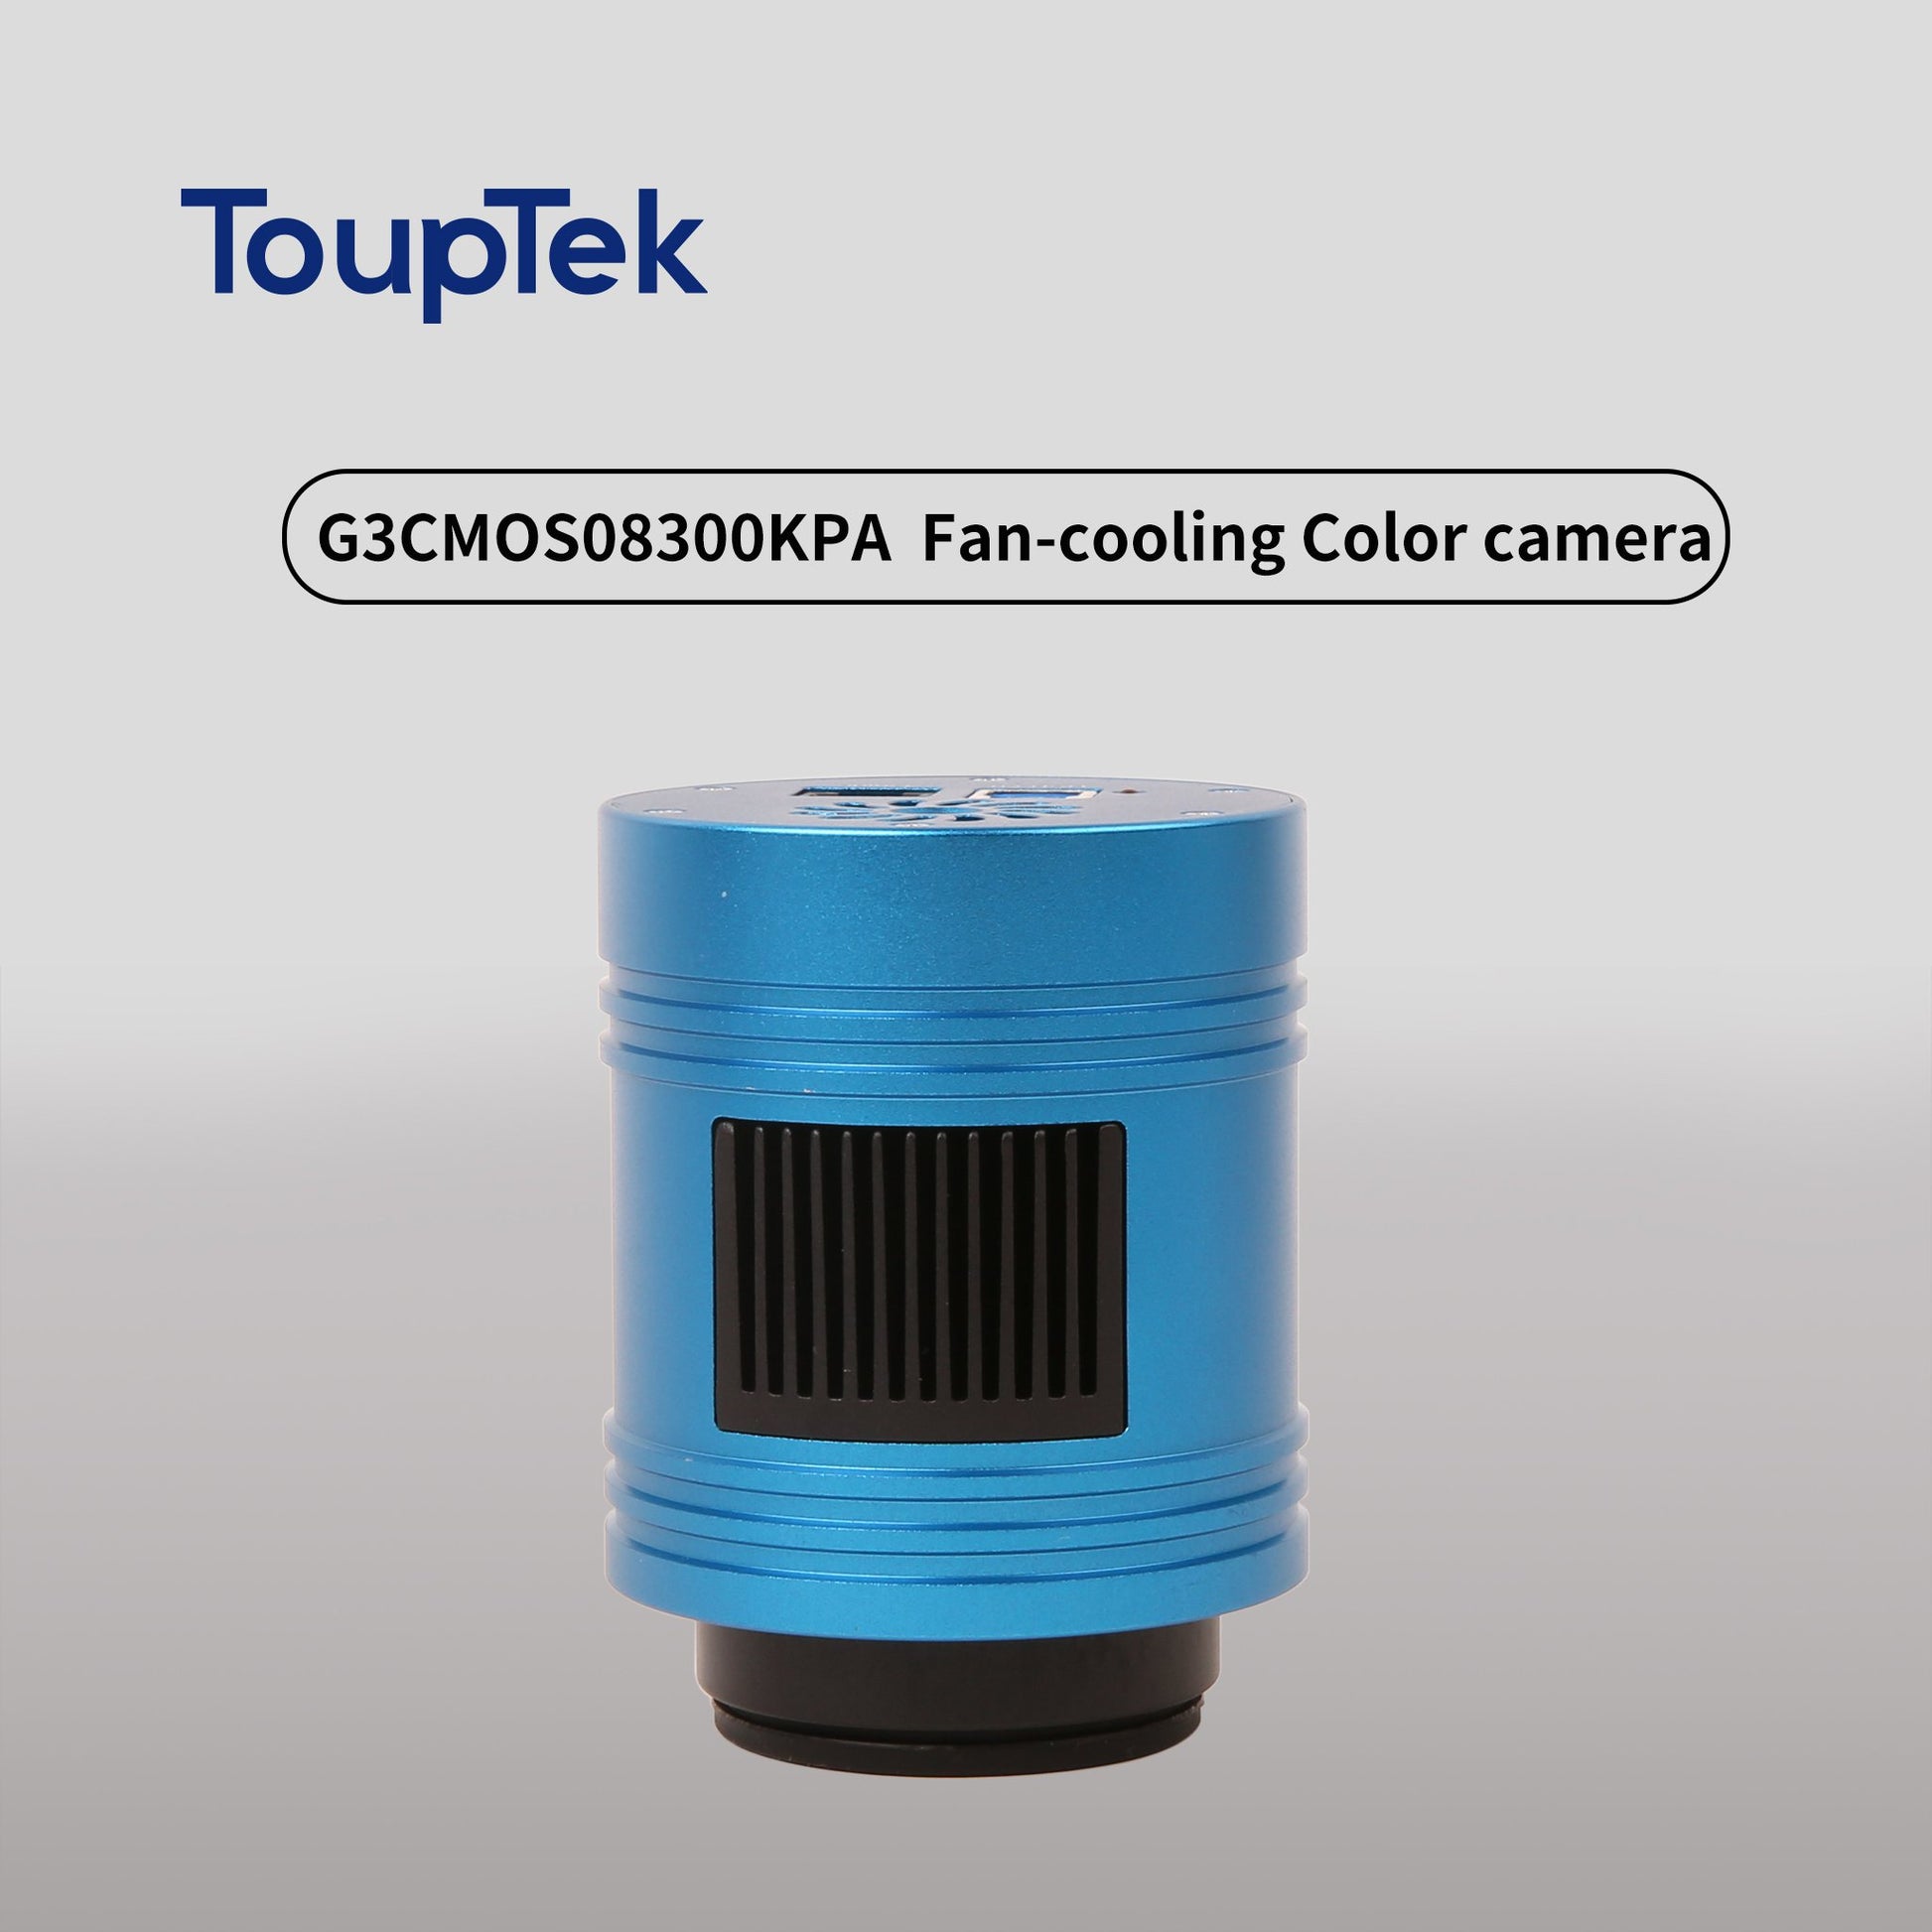 G3CMOS08300KPA IMX585 Fan-cooling Colorful Camera